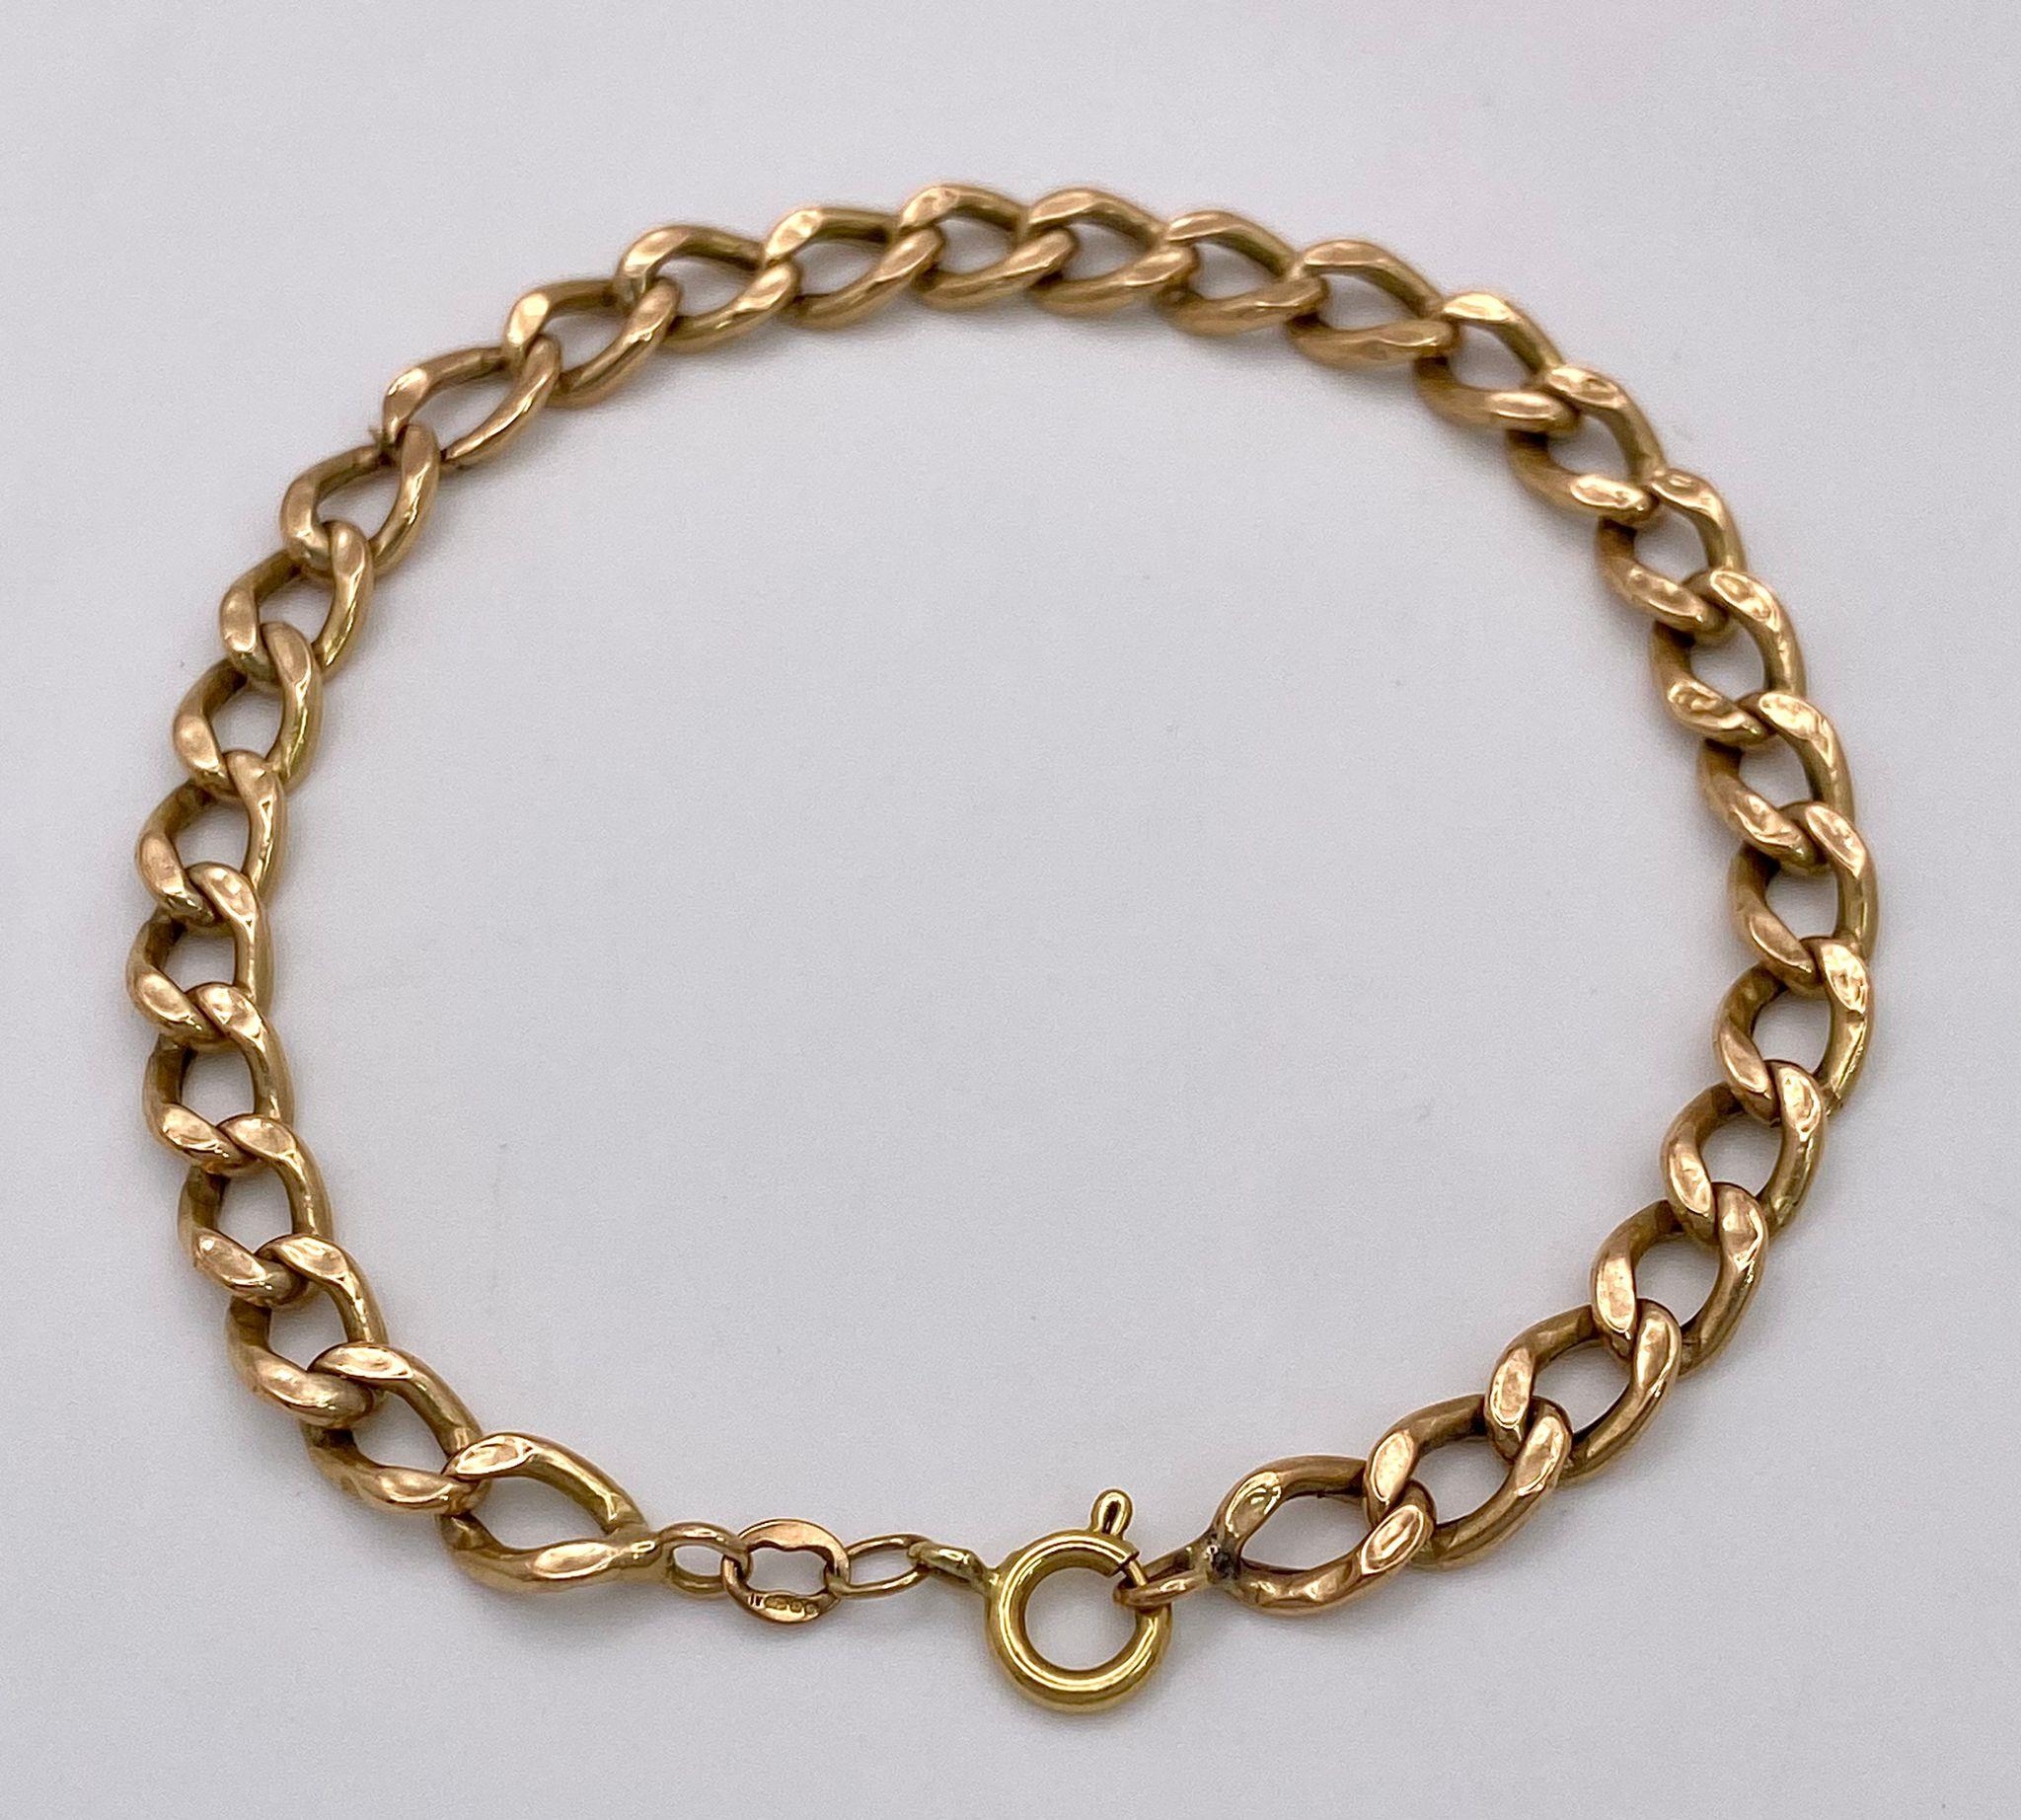 An 18K Yellow Gold Flat Curb Link Bracelet. 19cm. 4.25g weight. - Image 4 of 6